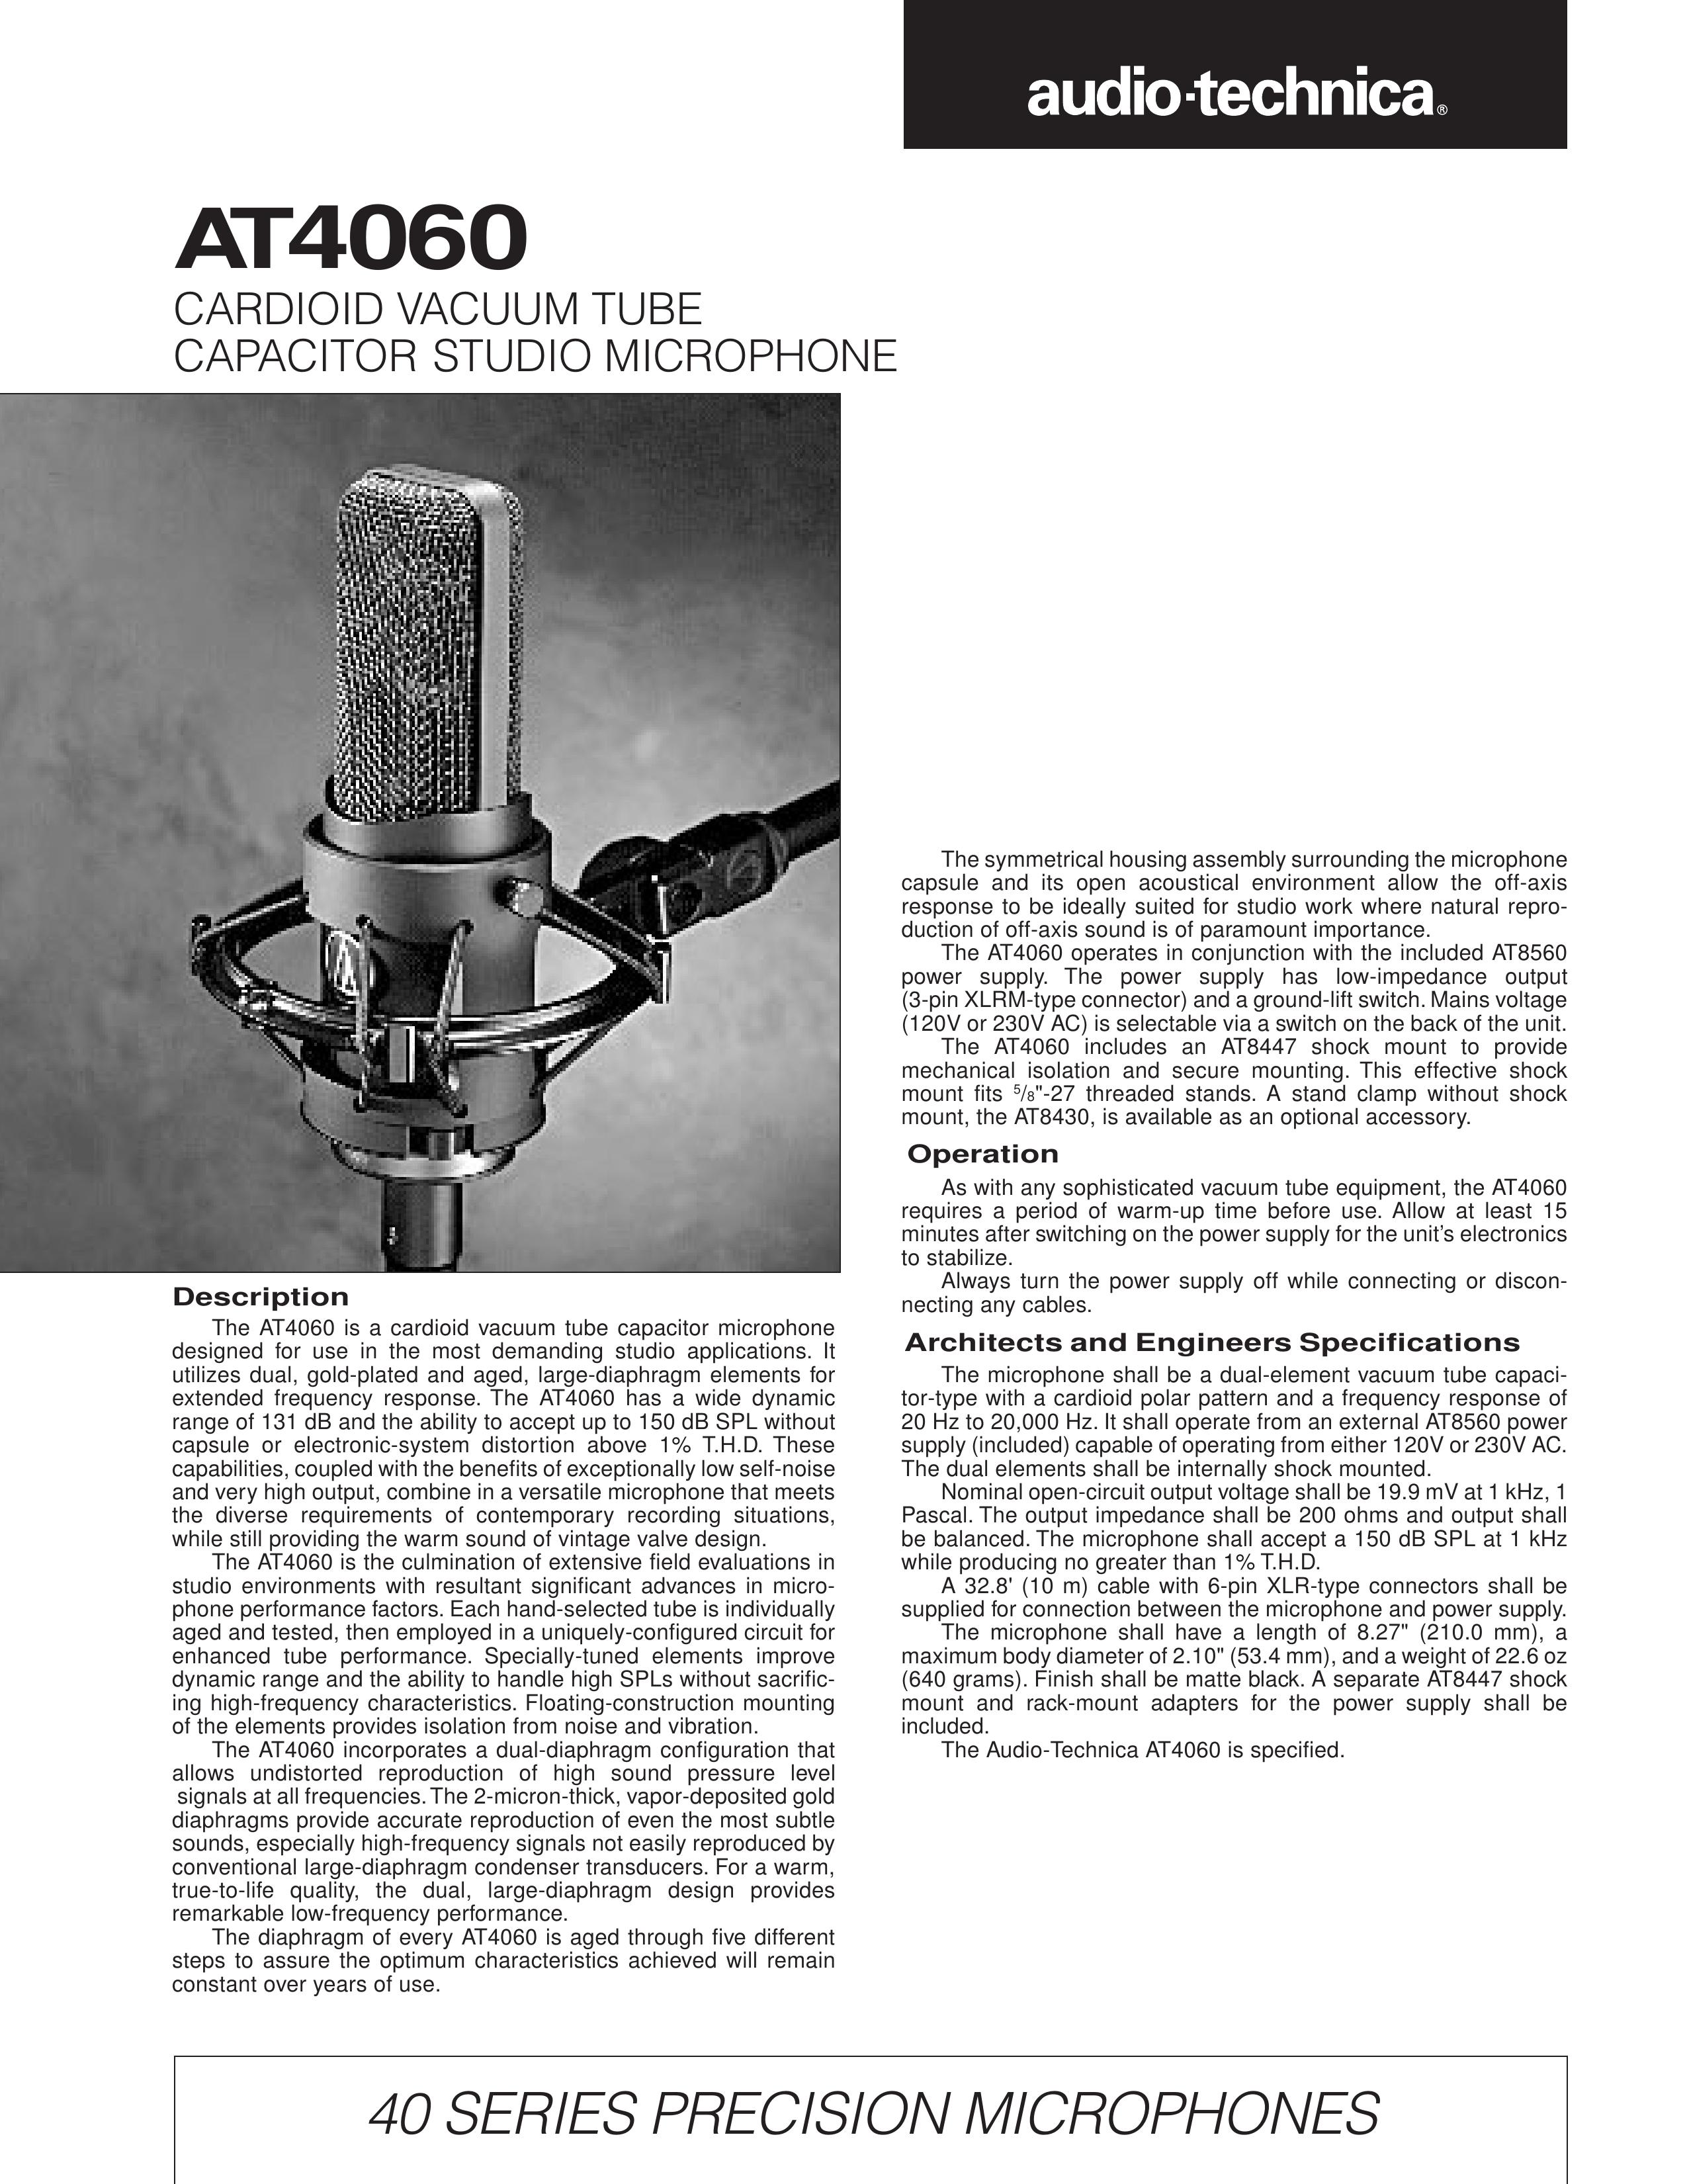 Audio-Technica AT 4060 Microphone User Manual